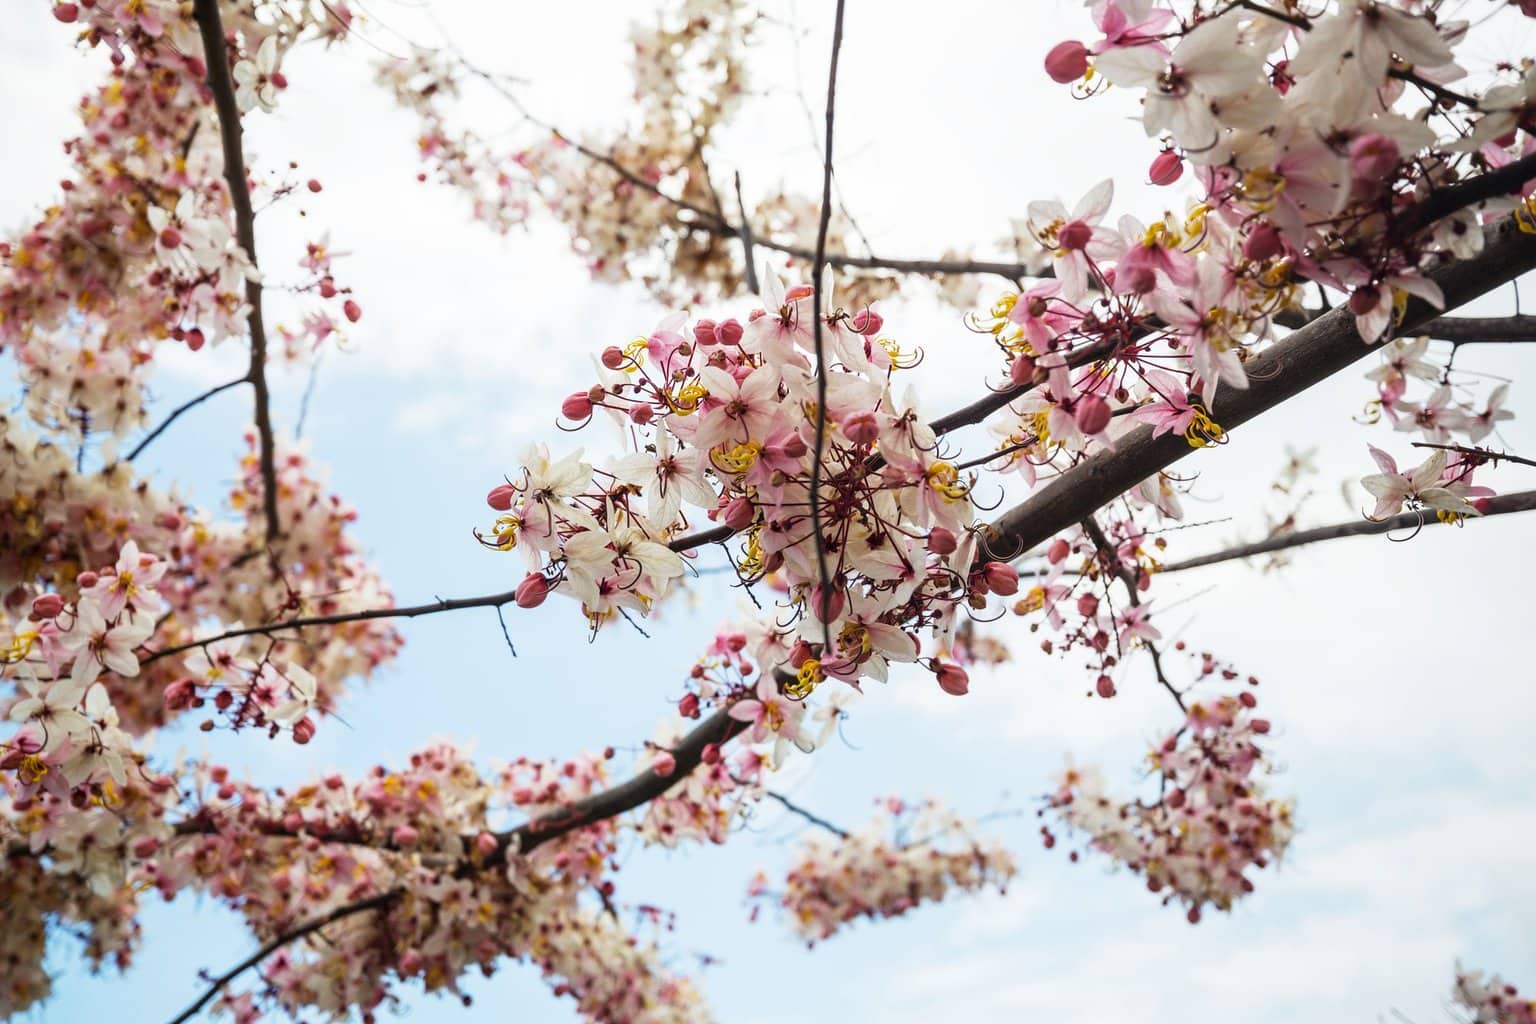 15 Best Cherry Blossom Festivals in the United States